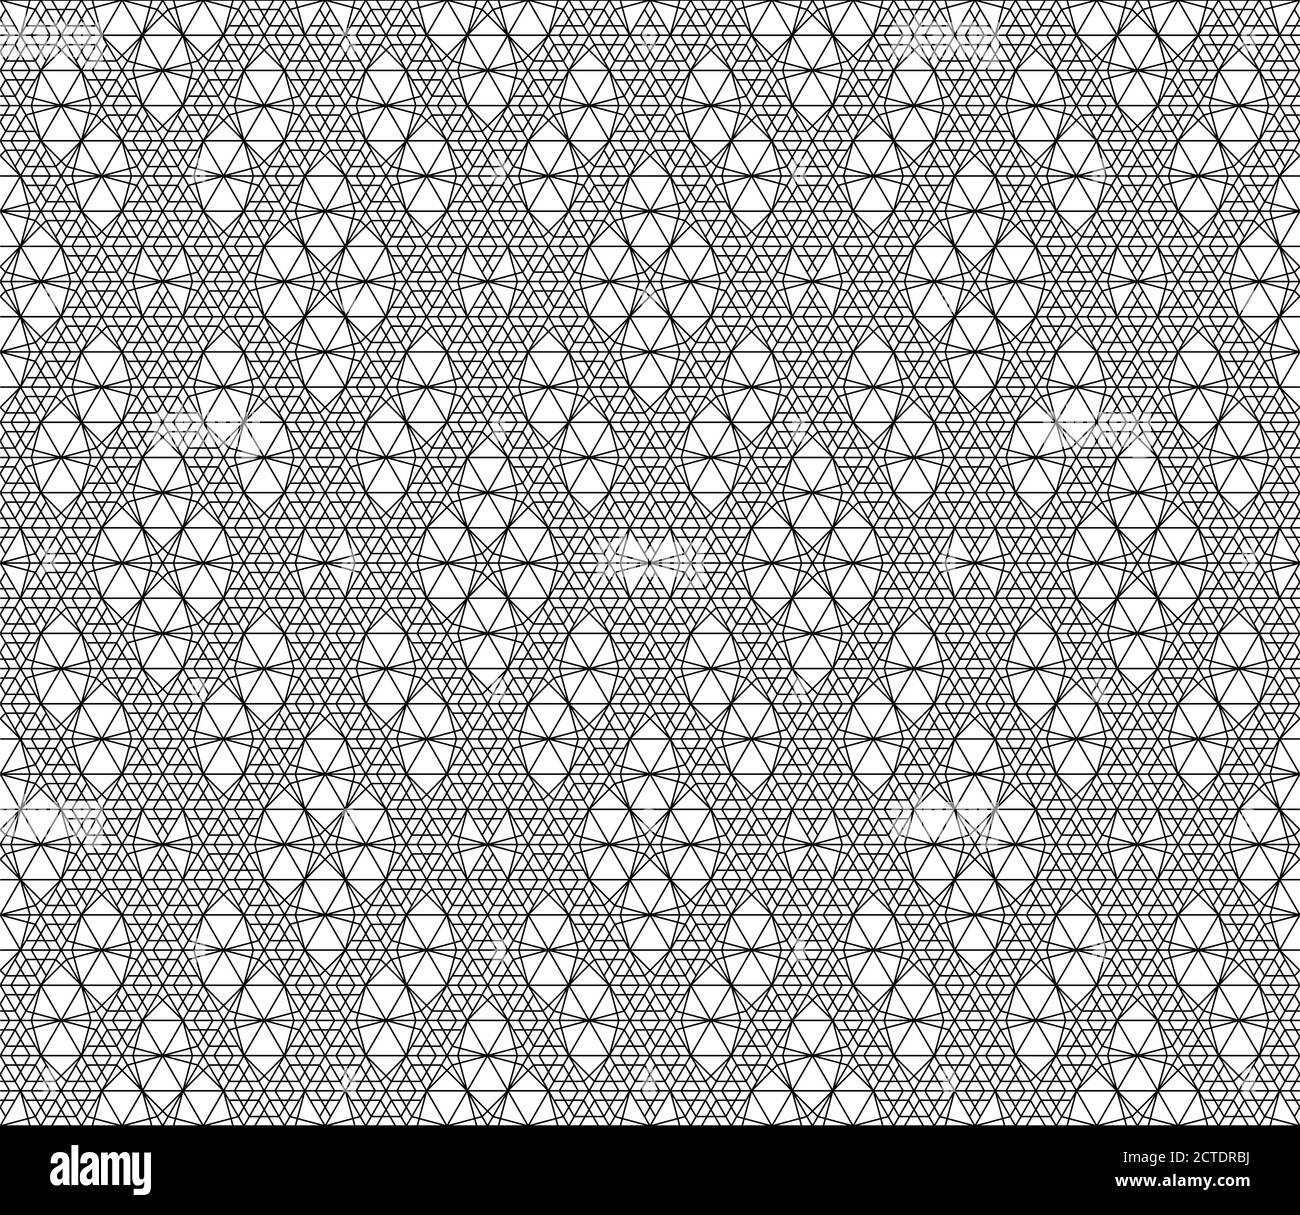 Japanese seamless Kumiko pattern in black and white silhouette with fine lines. Stock Vector